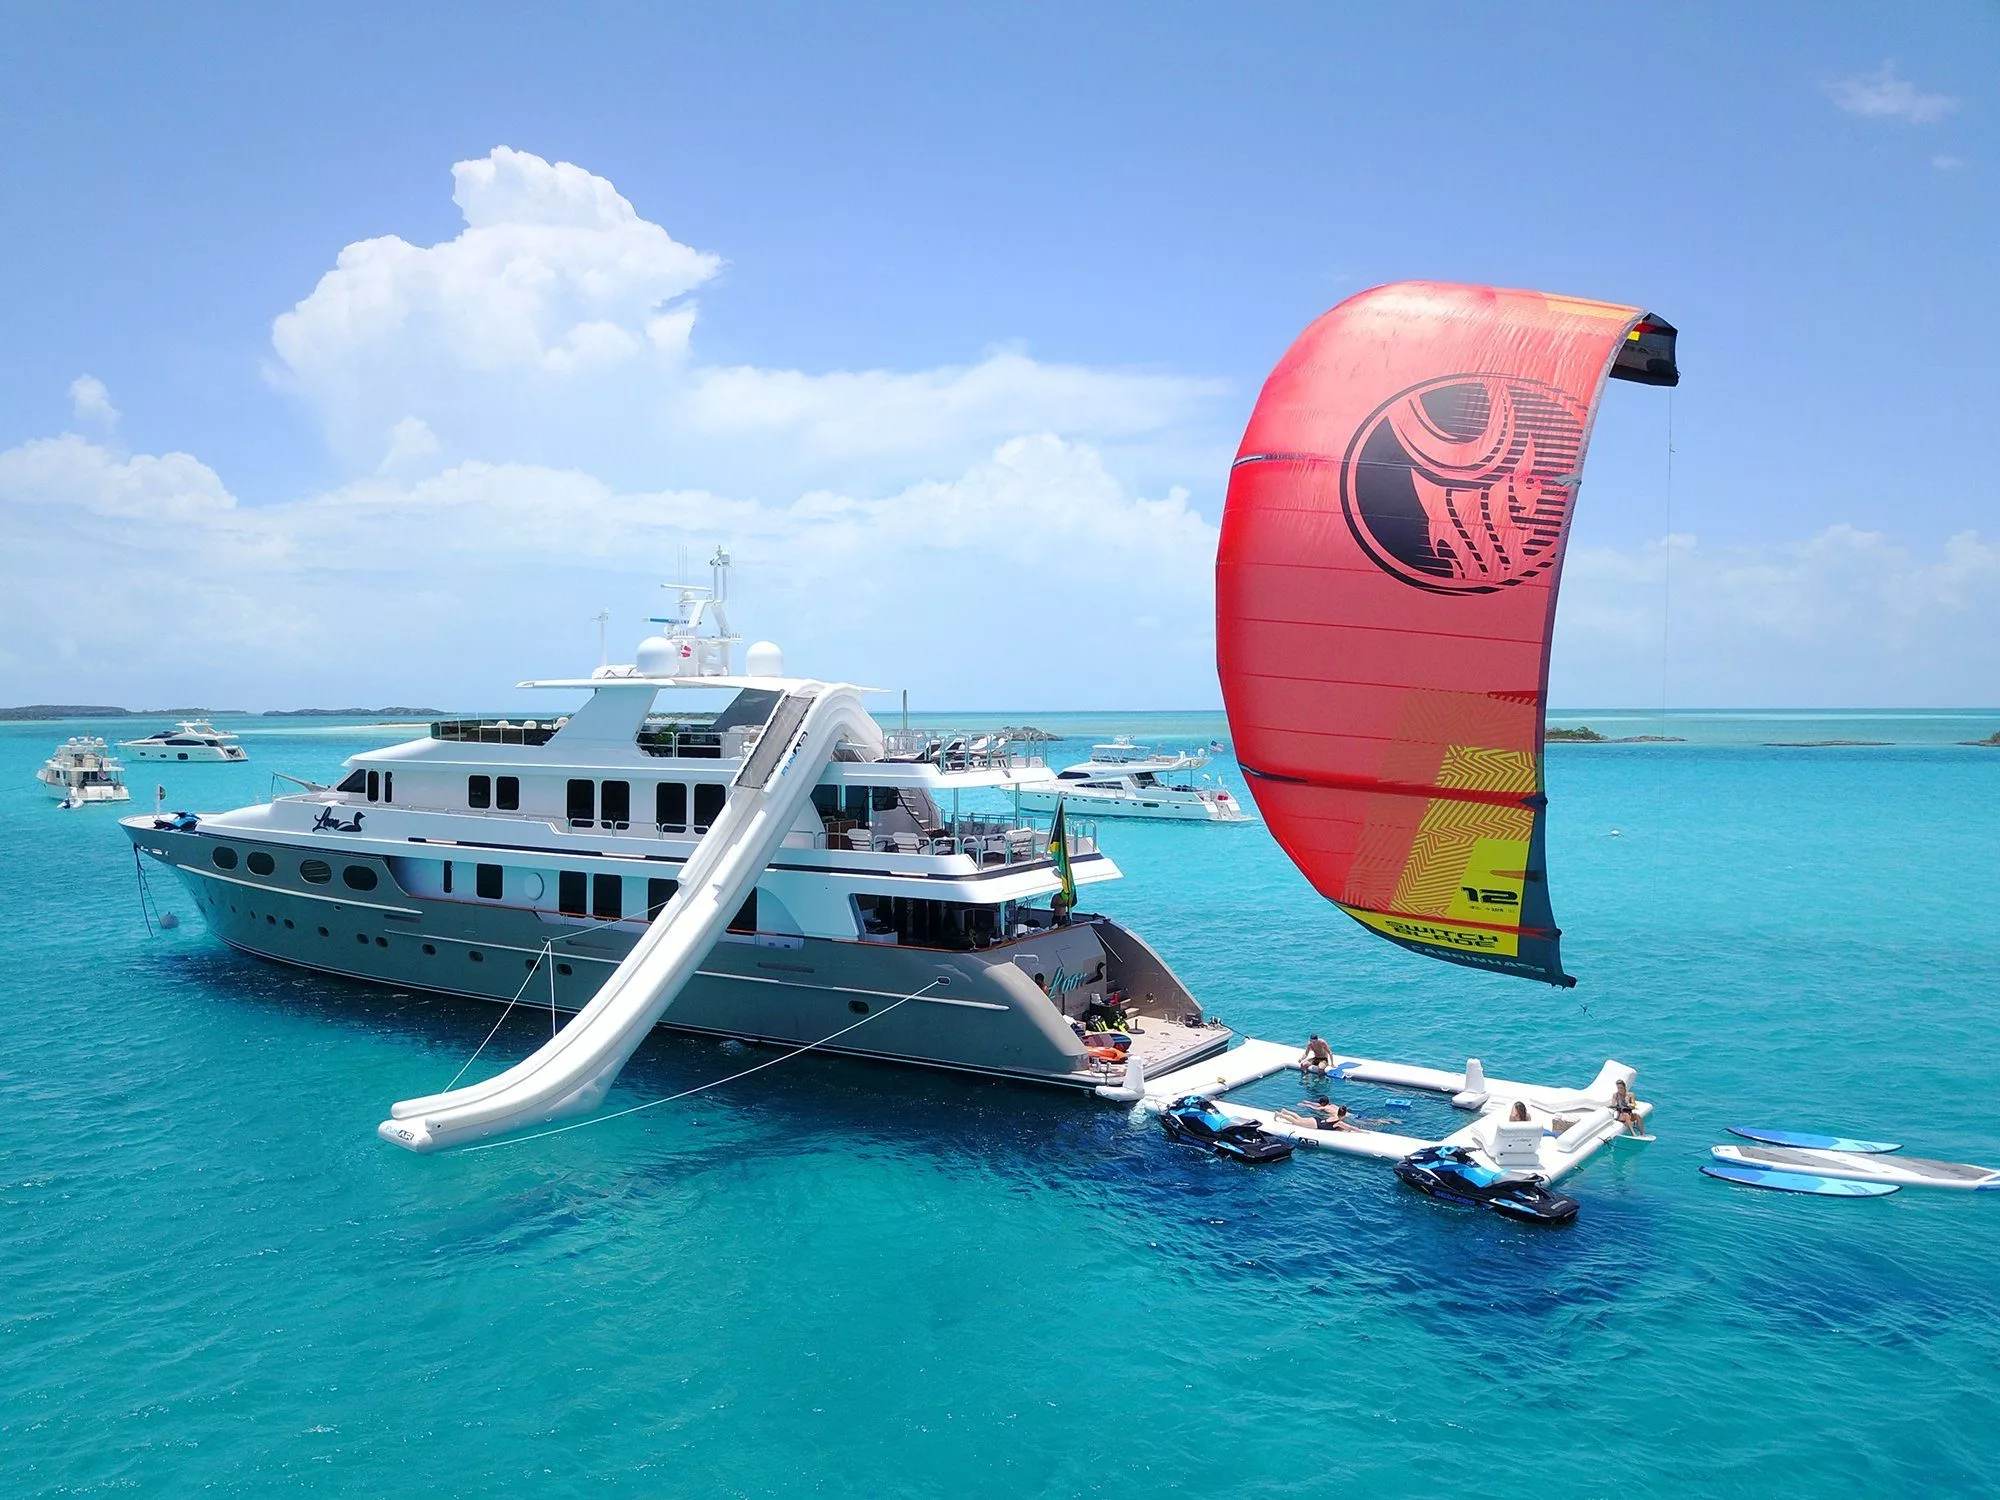 Drone view of Motor Yacht Loon with Yacht Slide Sea Pool and kite surfer